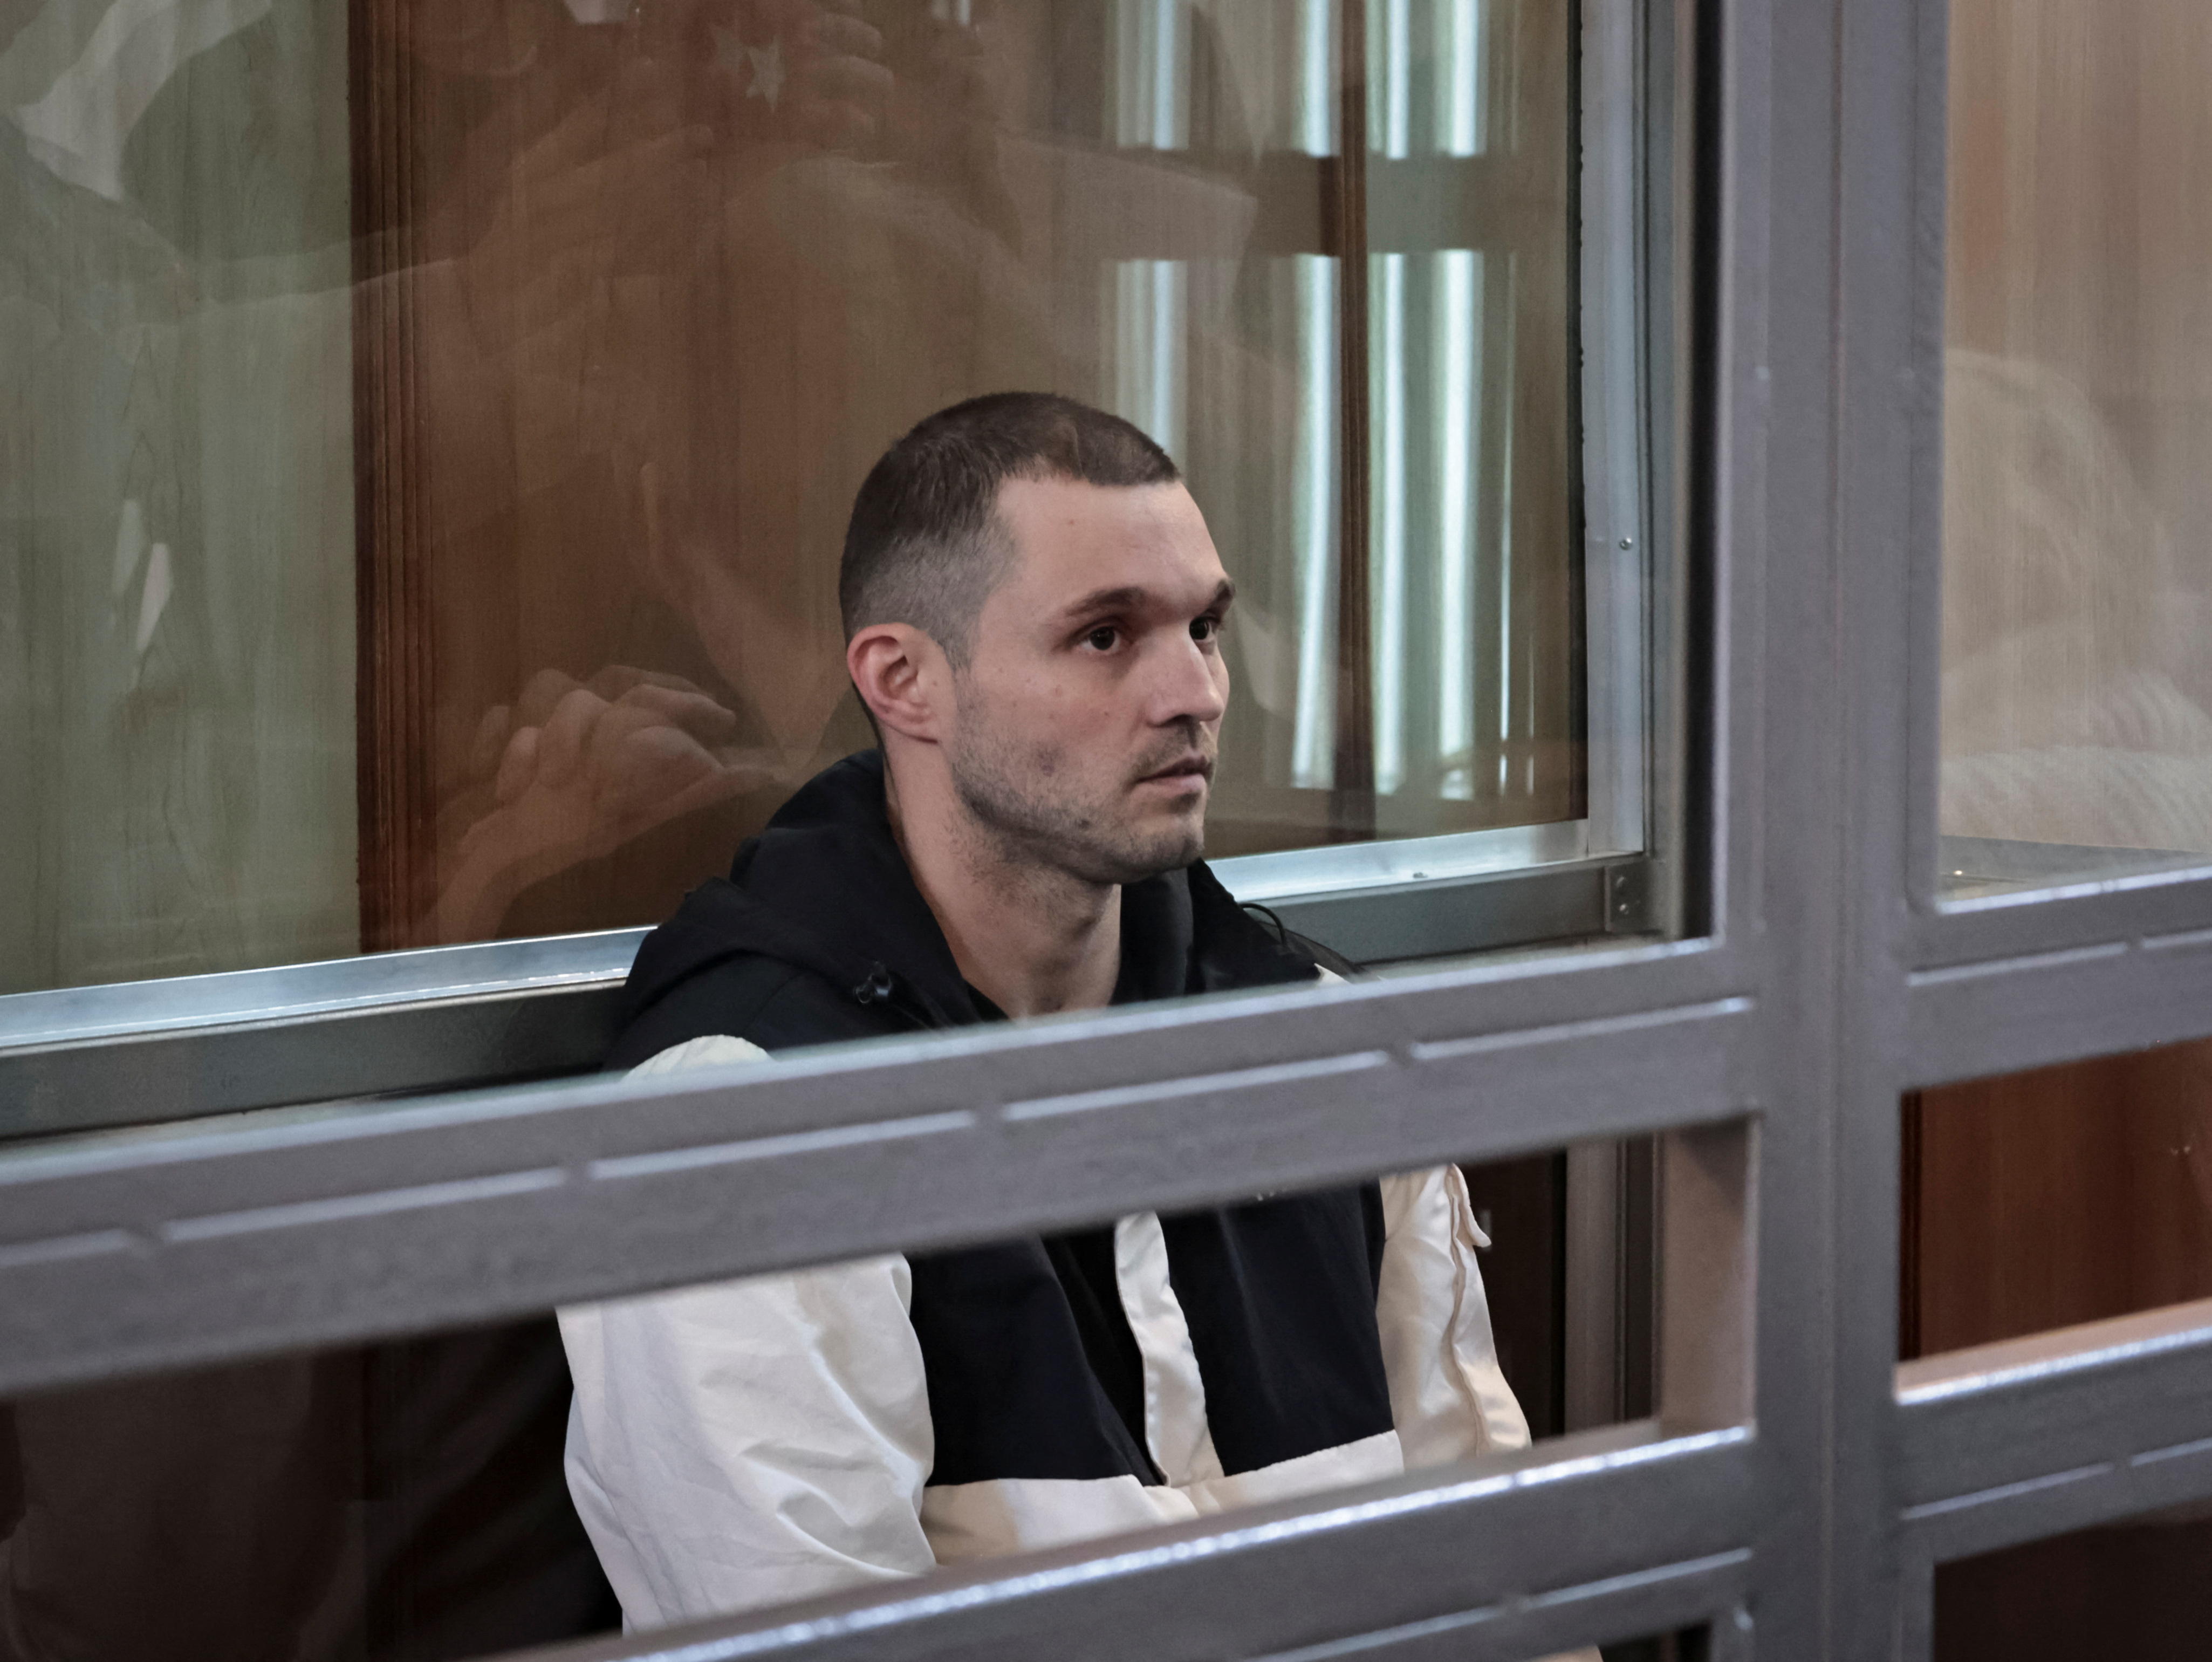 mGordon Black, a U.S. Army staff sergeant detained in Russia, appears in court in Vladivostok